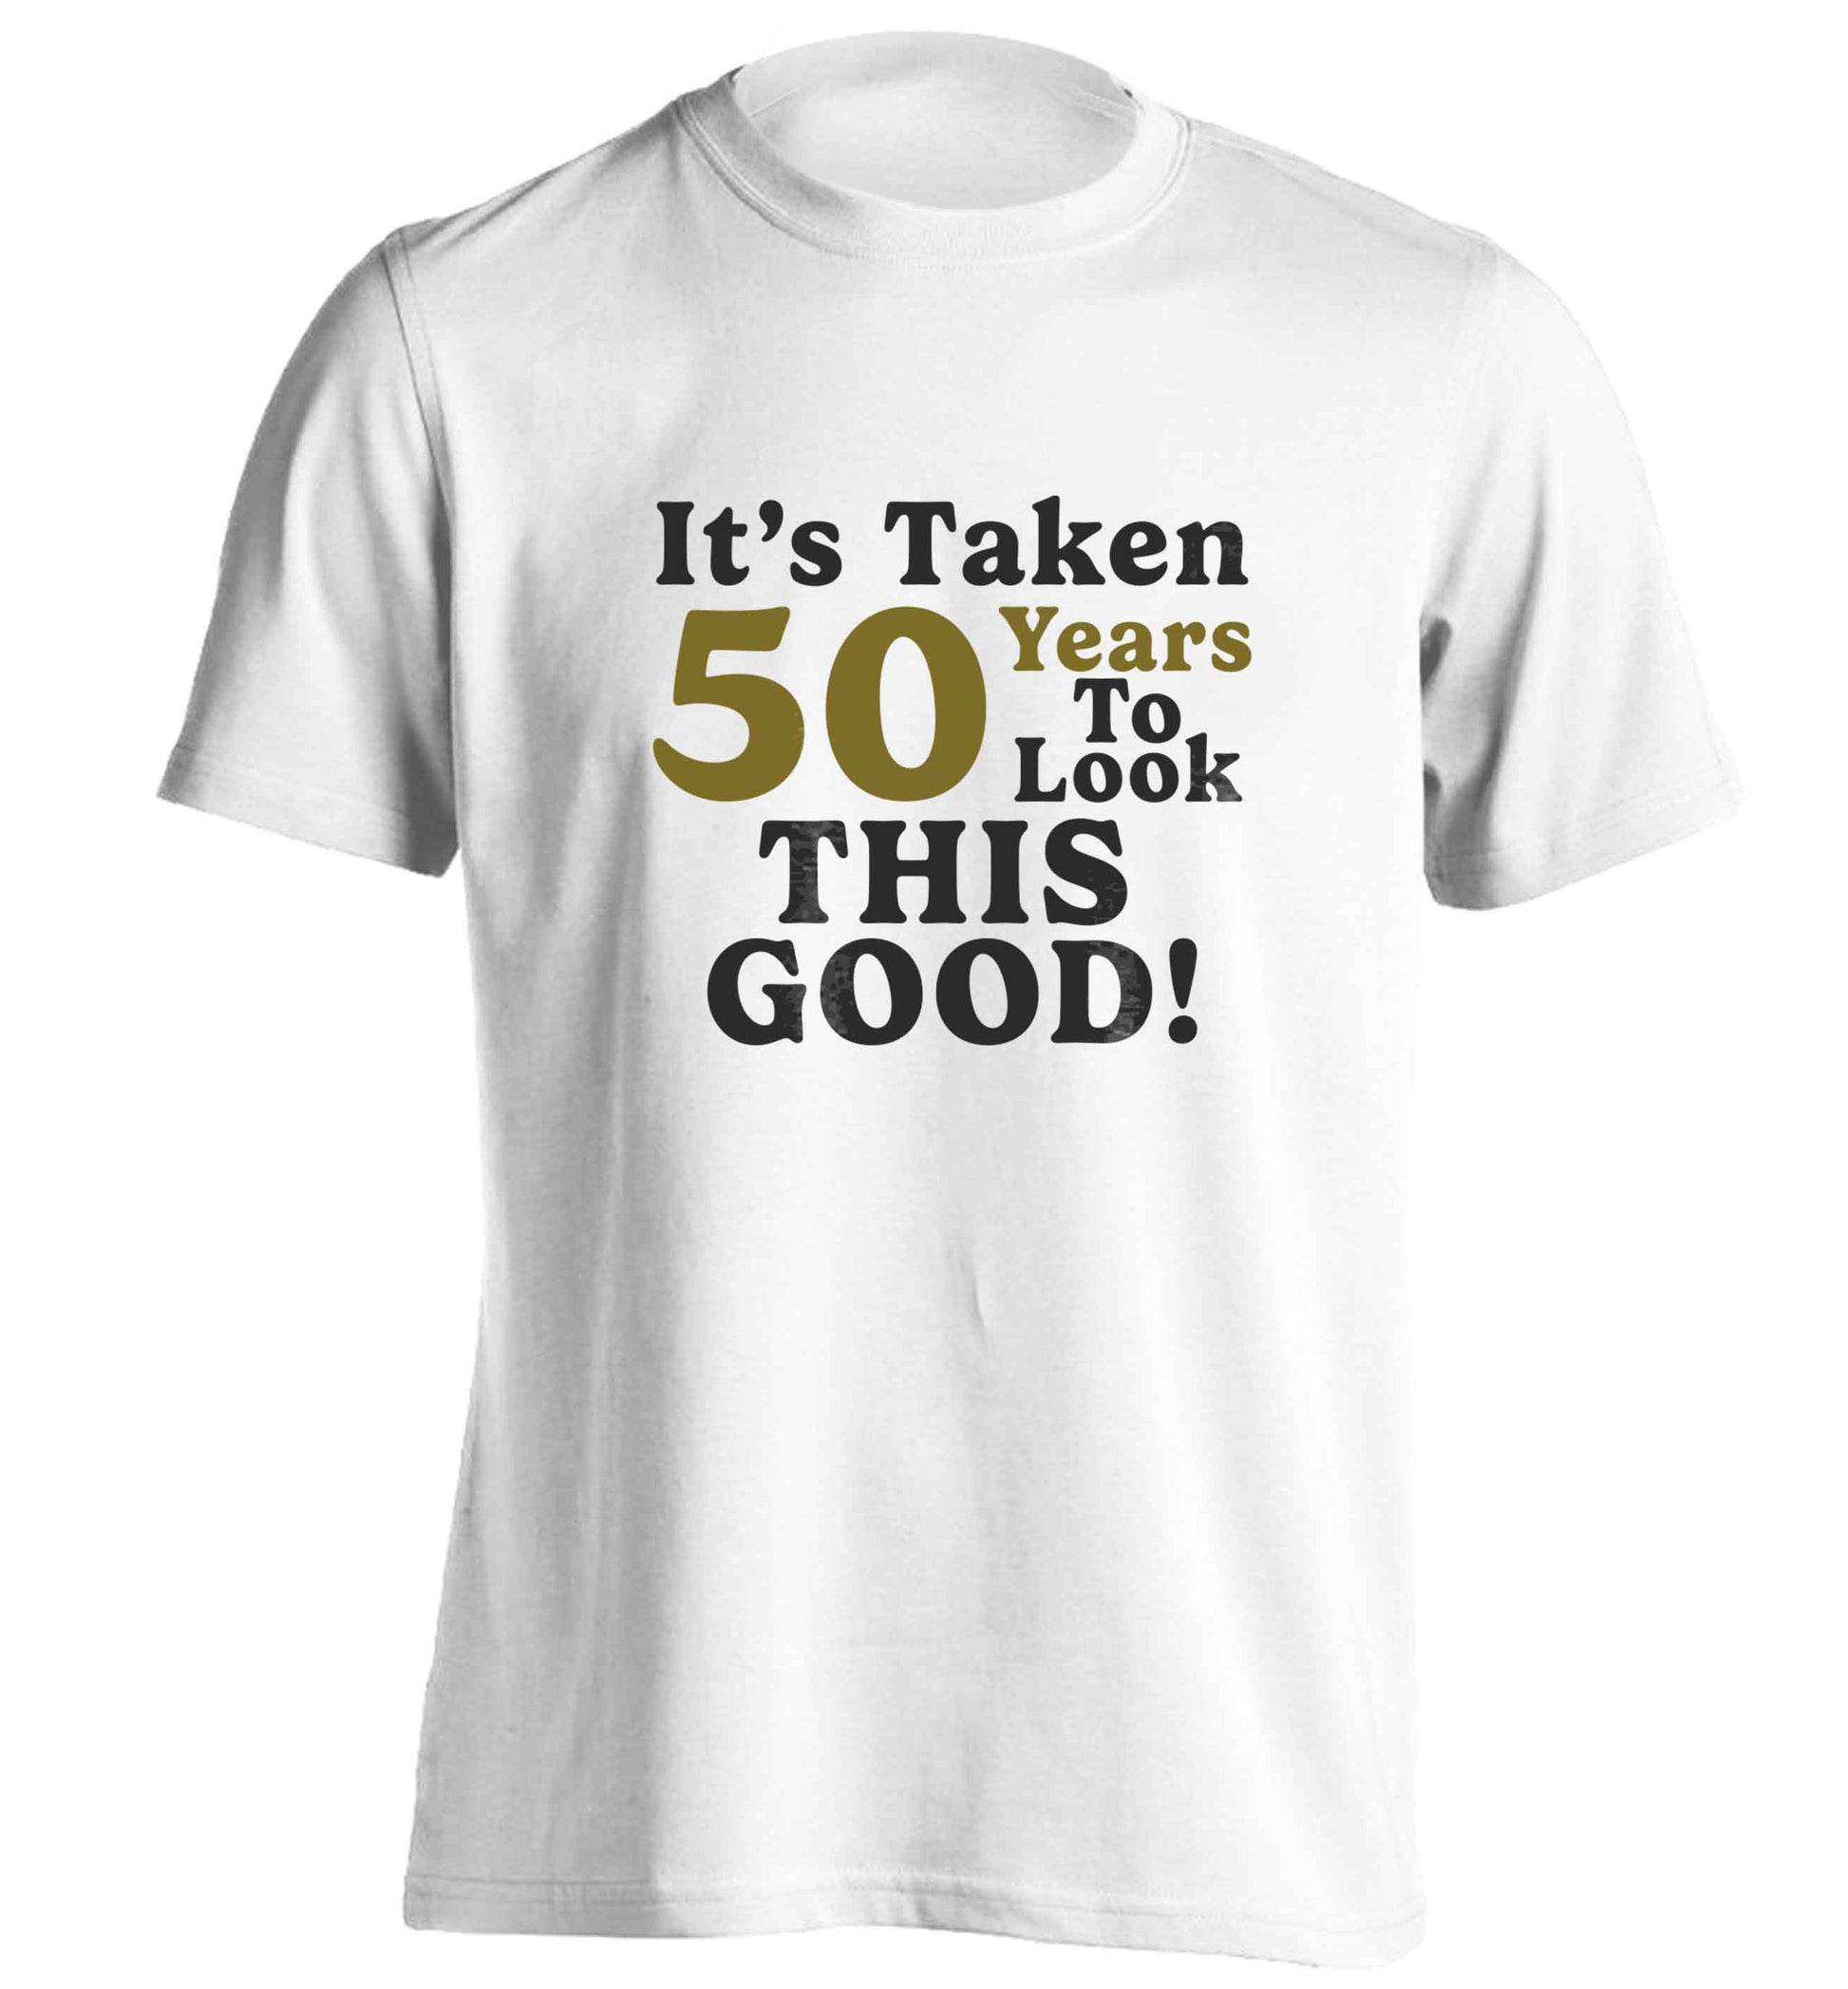 It's taken 50 years to look this good! adults unisex white Tshirt 2XL